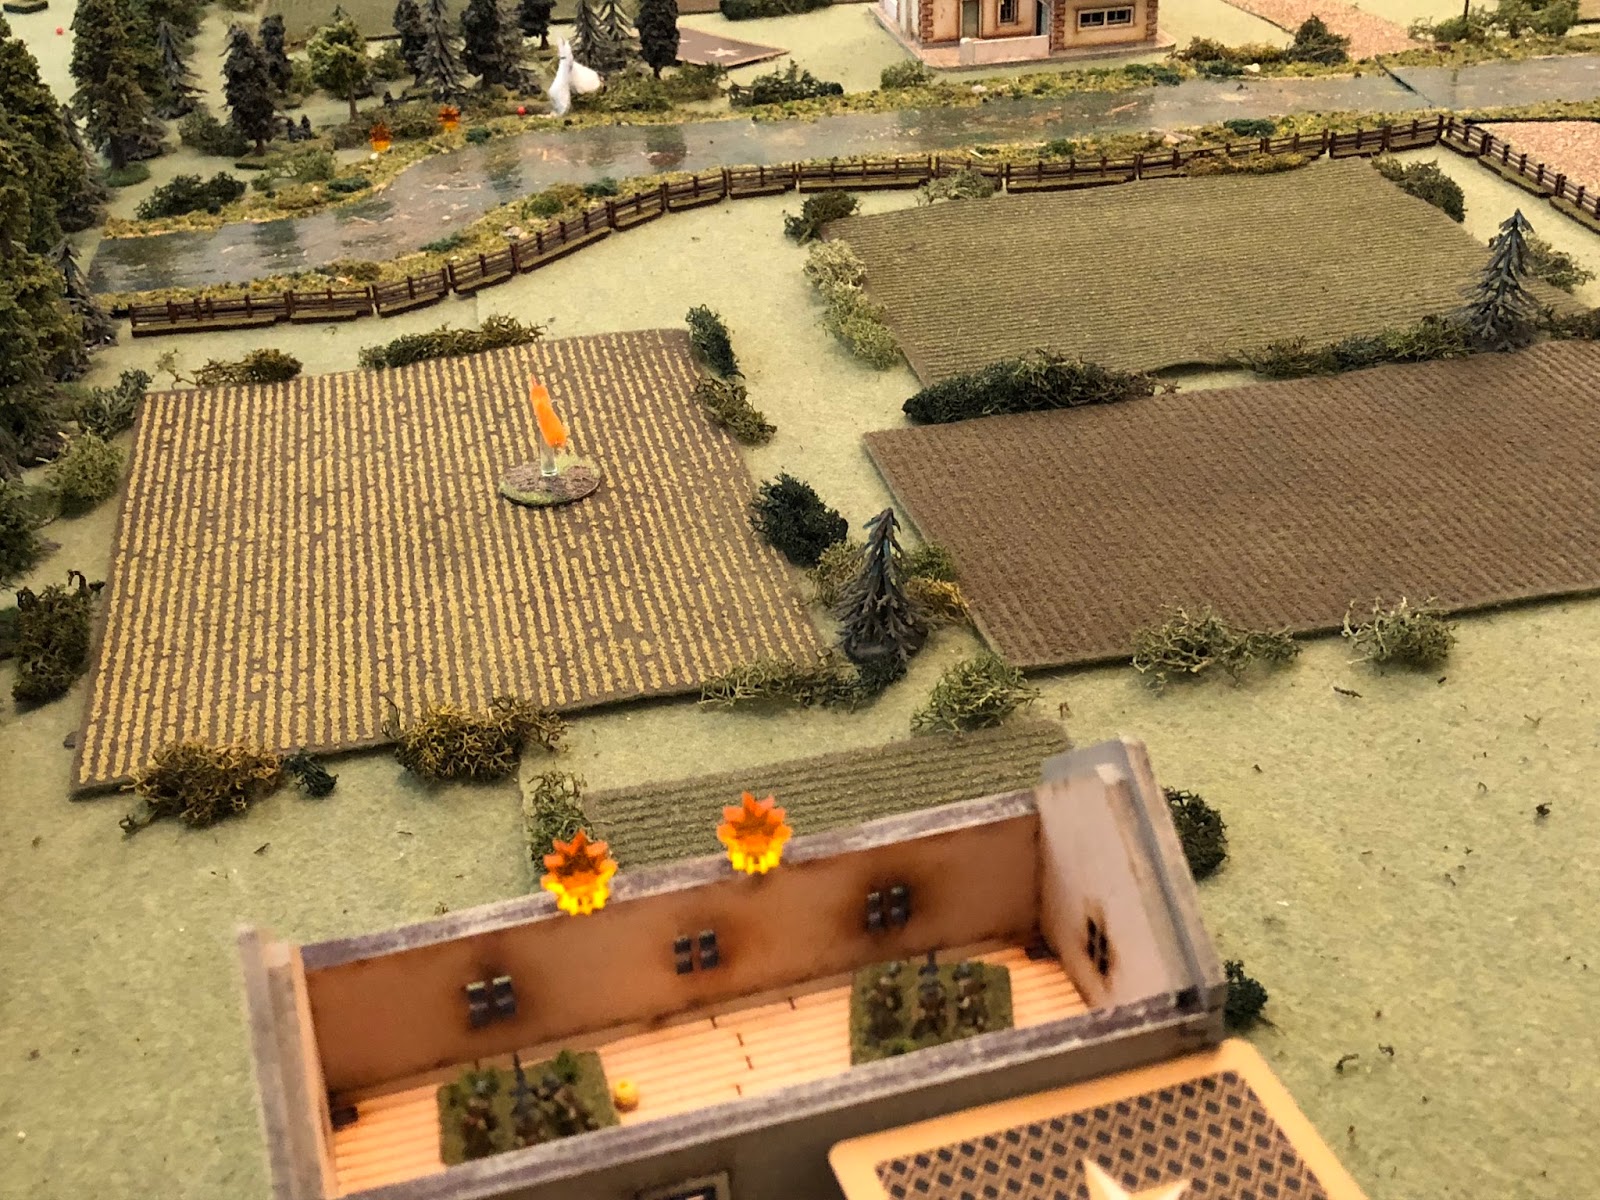  And then the French machine guns get into the action (bottom centre), sending tracers into the woodline across the river (top left, you can see the orange explosions of their impacts, as well as the white puff from the mortar's spotting round). 